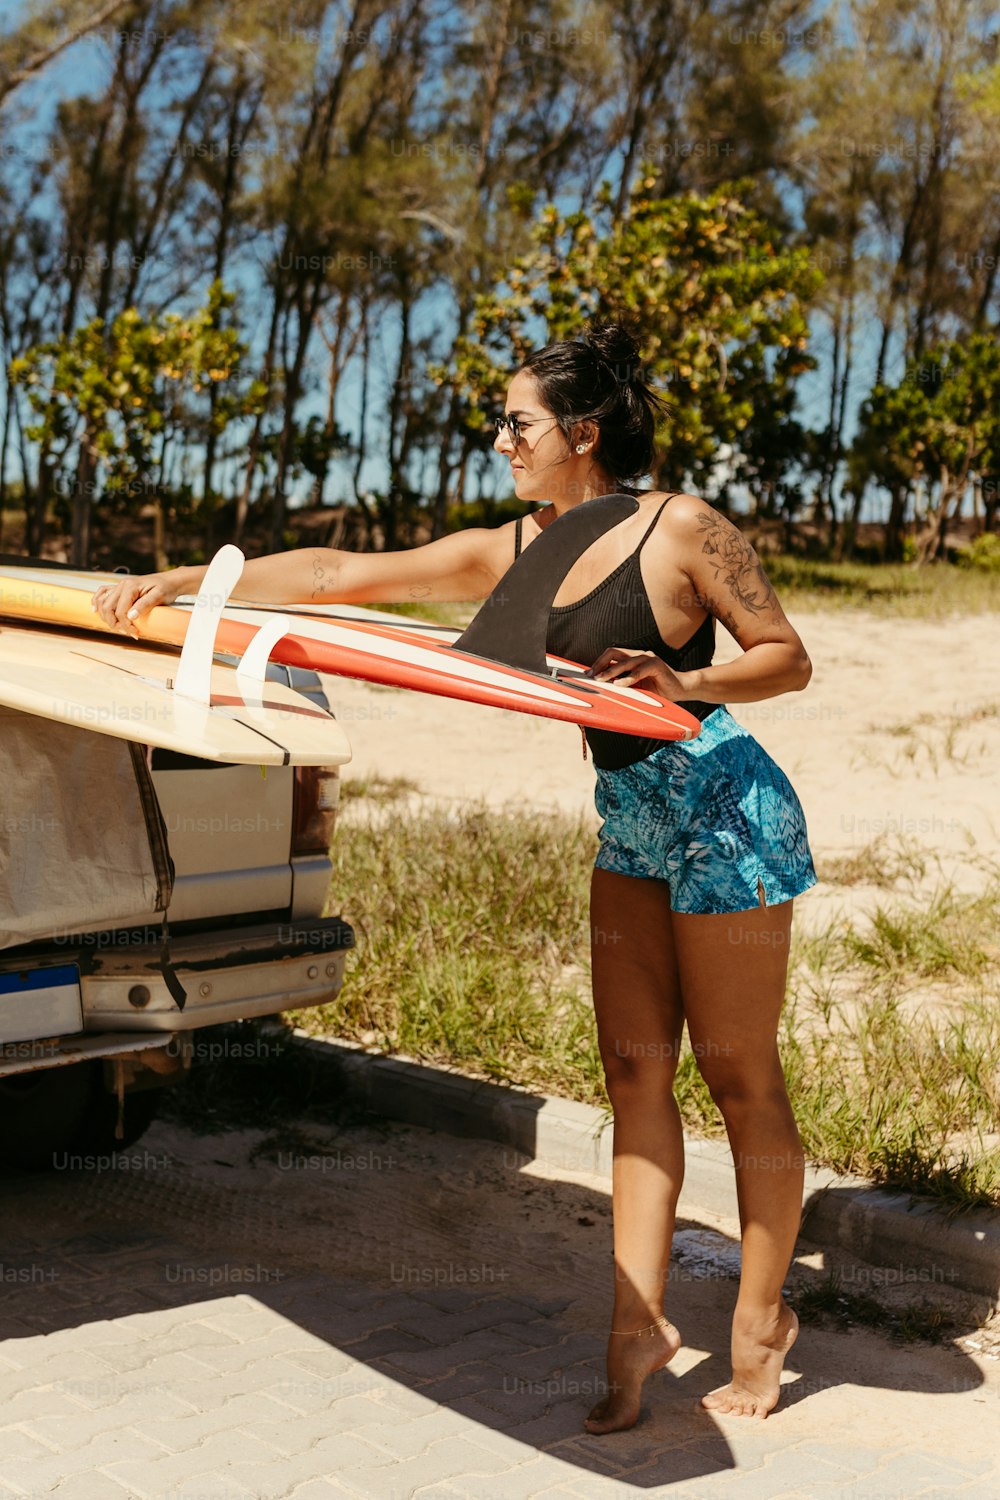 a woman holding a surfboard next to a truck